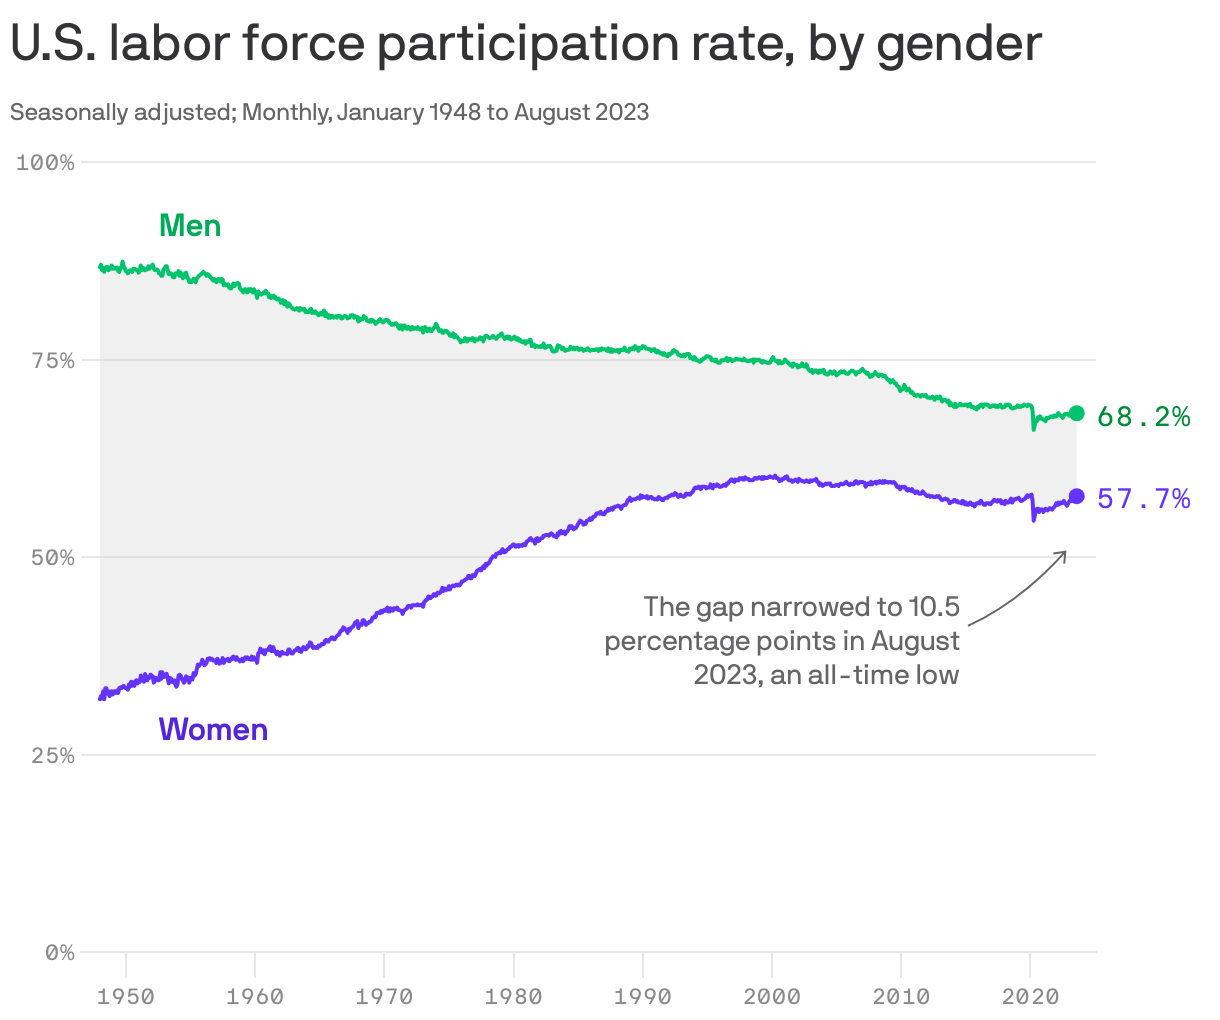 U.S. labor force participation rate, by gender